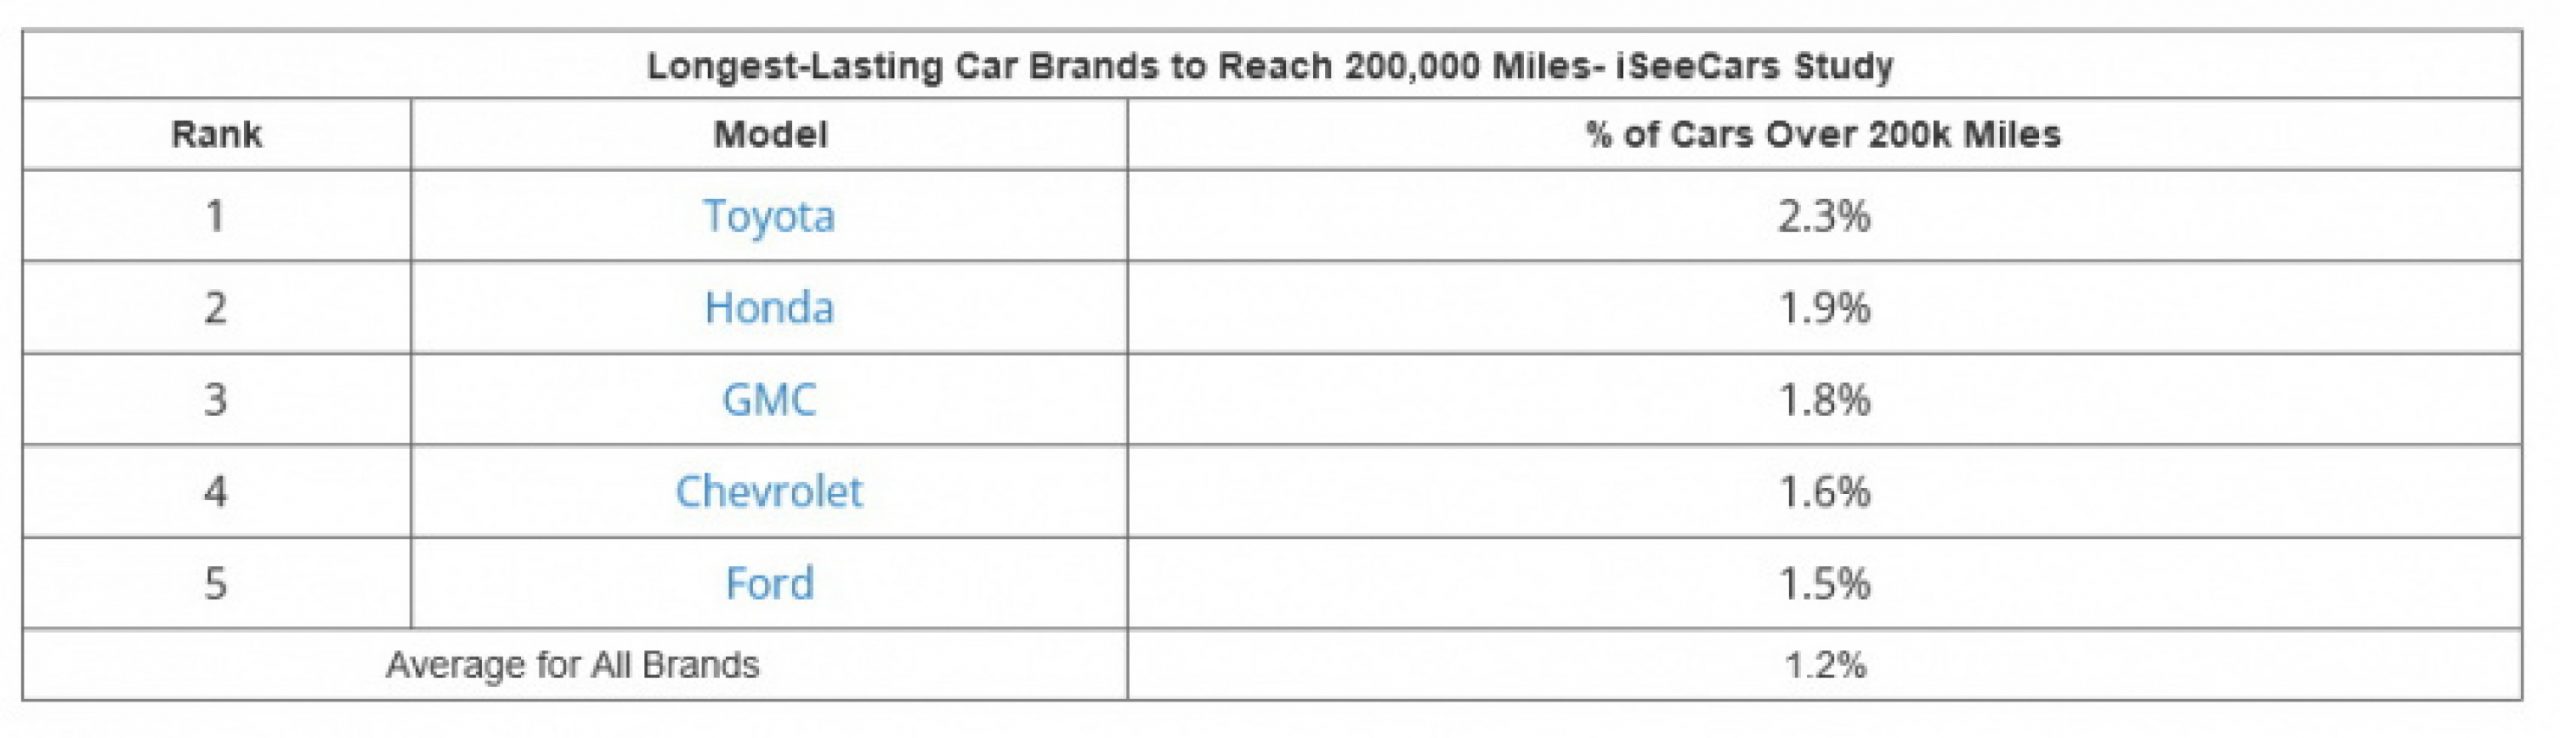 autos, cars, news, chevrolet, chevrolet suburban, ford, ford f-150, gmc yukon, honda ridgeline, nissan, nissan titan, study, toyota, toyota 4runner, toyota land cruiser, toyota sequoia, toyota tacoma, toyota tundra, these are the cars, suvs and trucks most likely to reach 200,000 miles